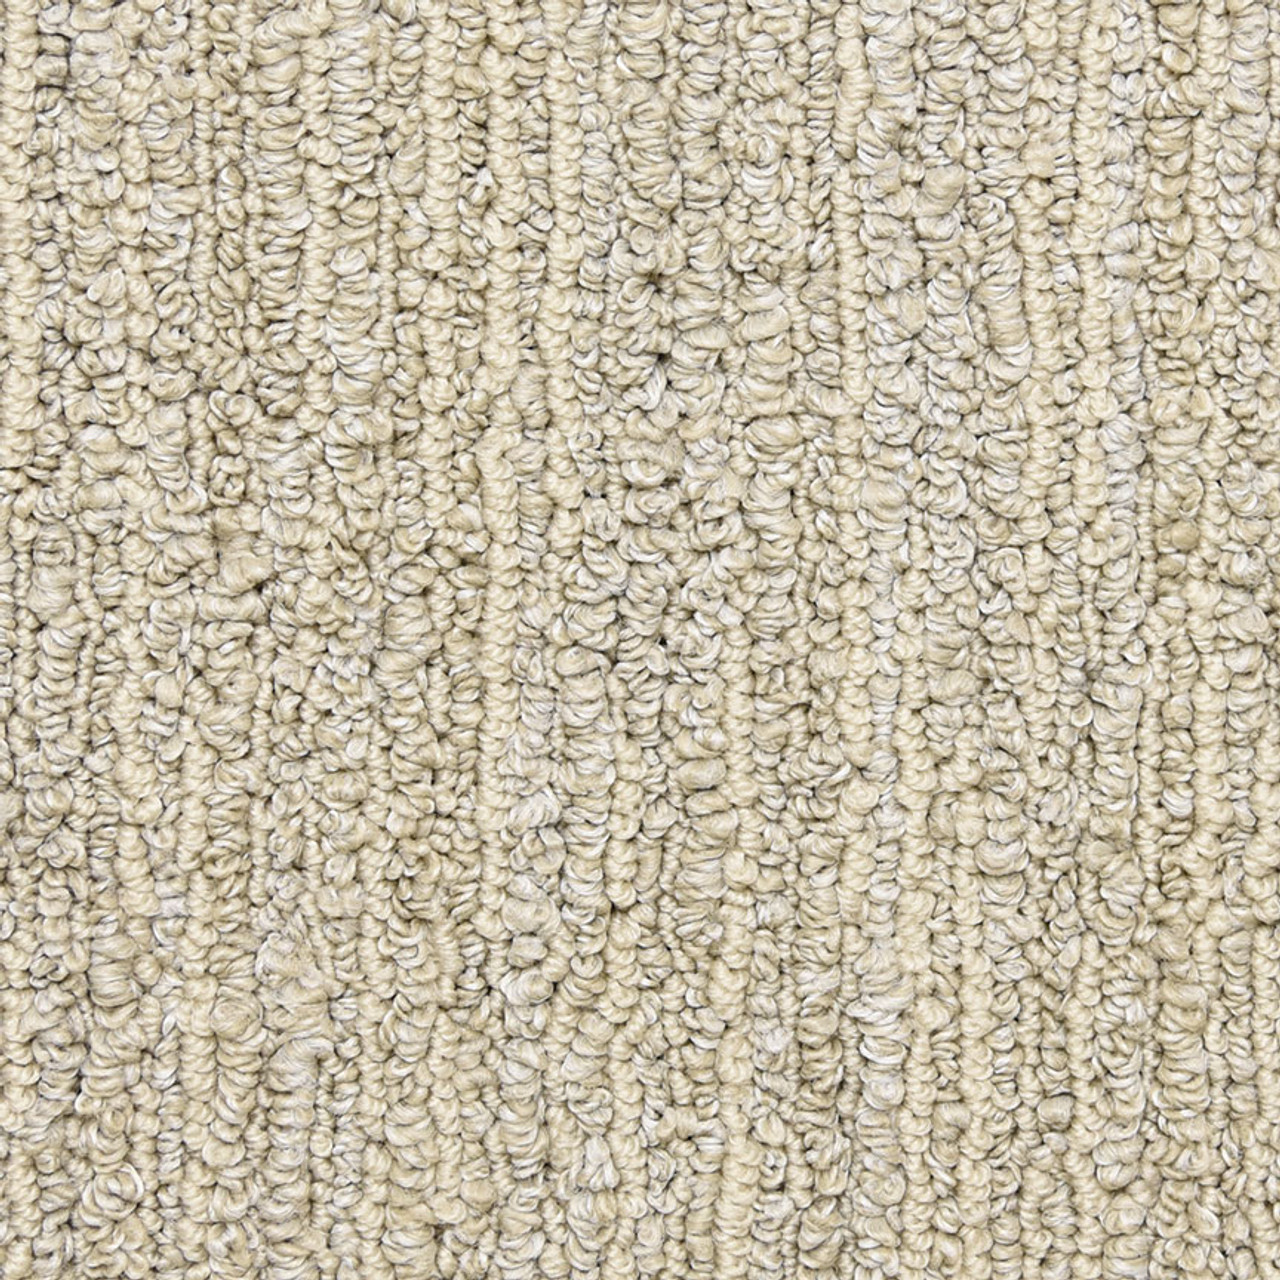 Buying Carpet Remnants: Pros, Cons, and Warranty Coverage